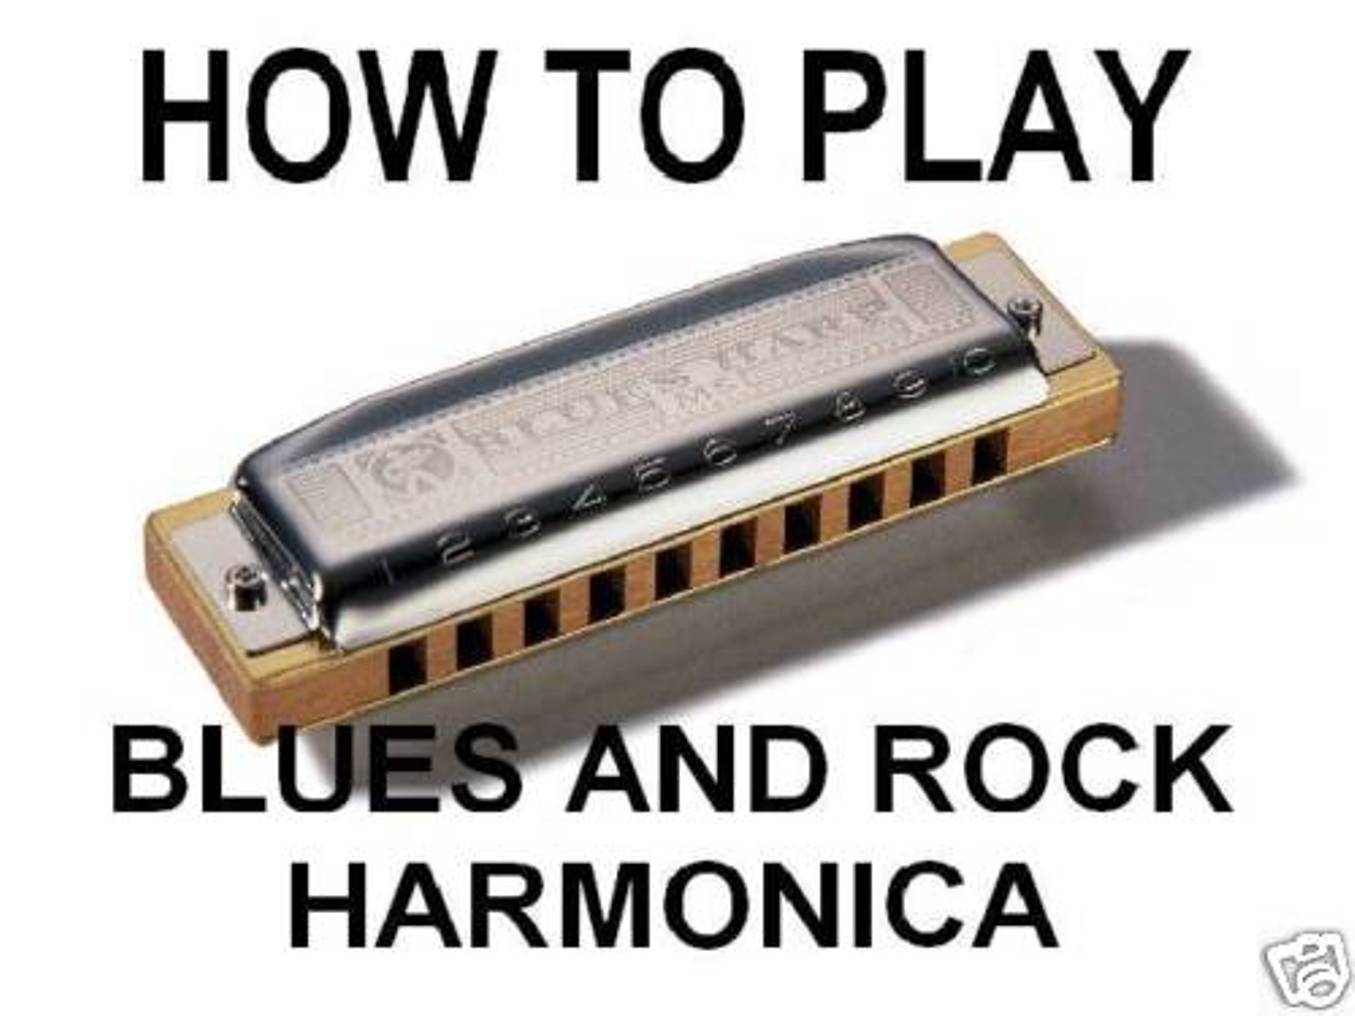 How To Play Blues & Rock Harmonica DVD Play REAL Harp Learn In A SINGLE DAY